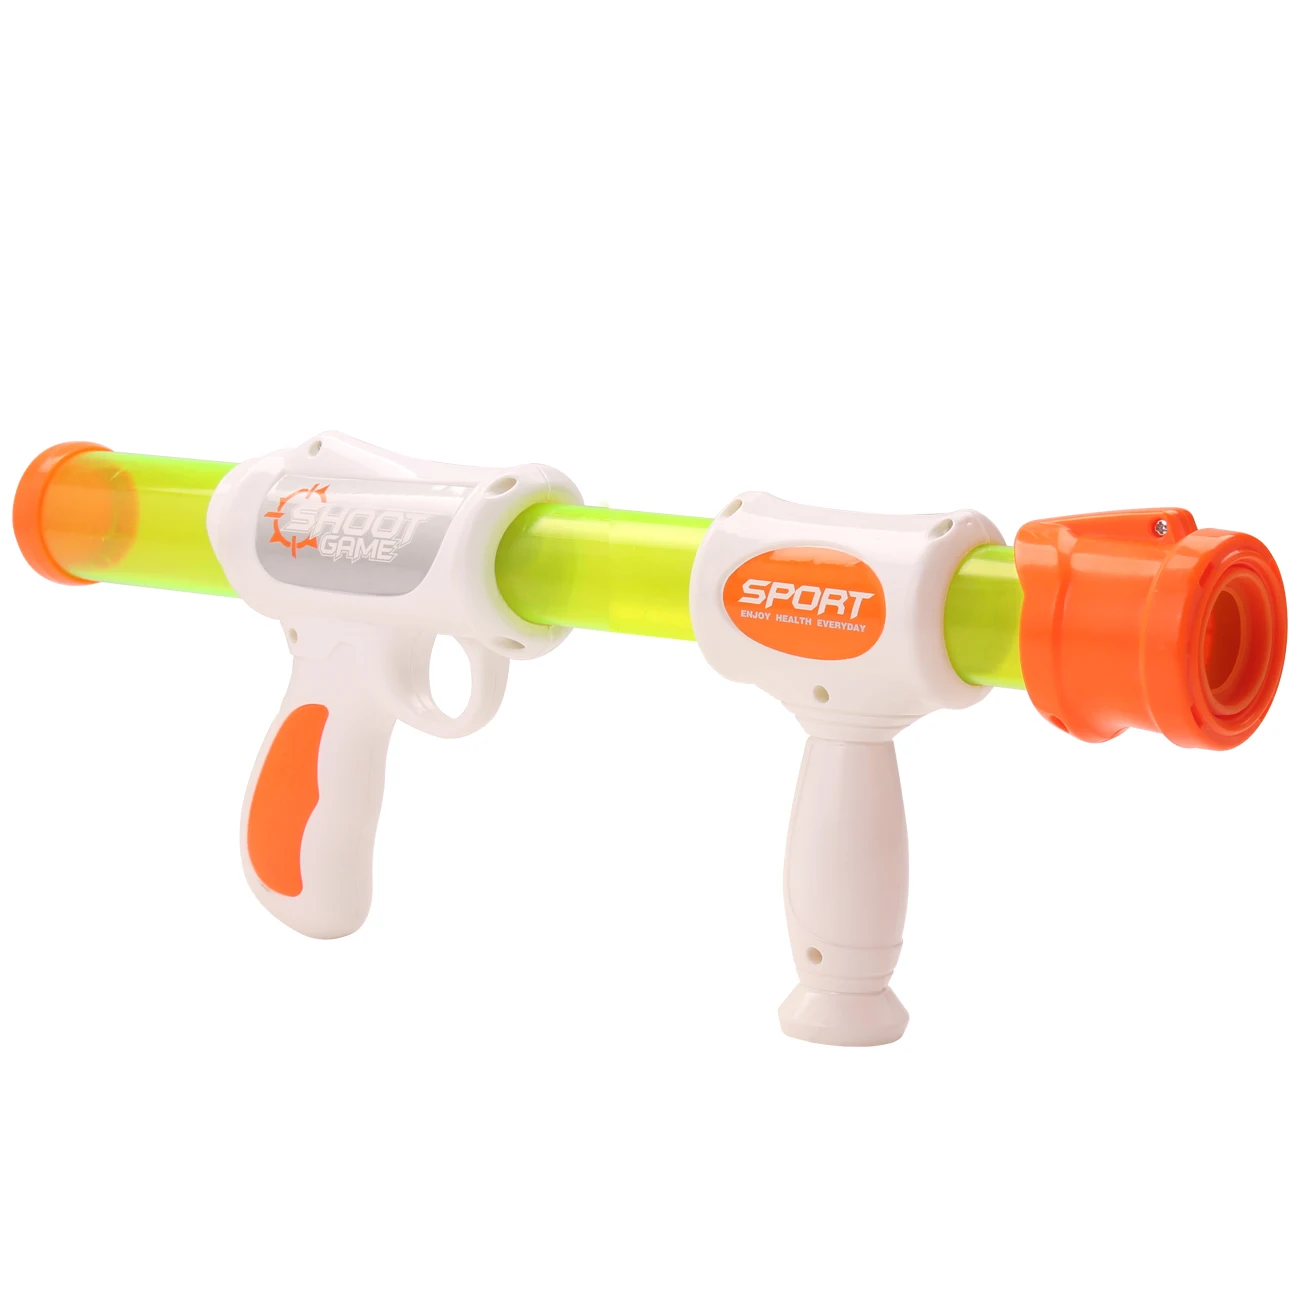 Double-Gun Foam Atomic Pump Action Air Popper for Child Birthday Christmas Gifts 